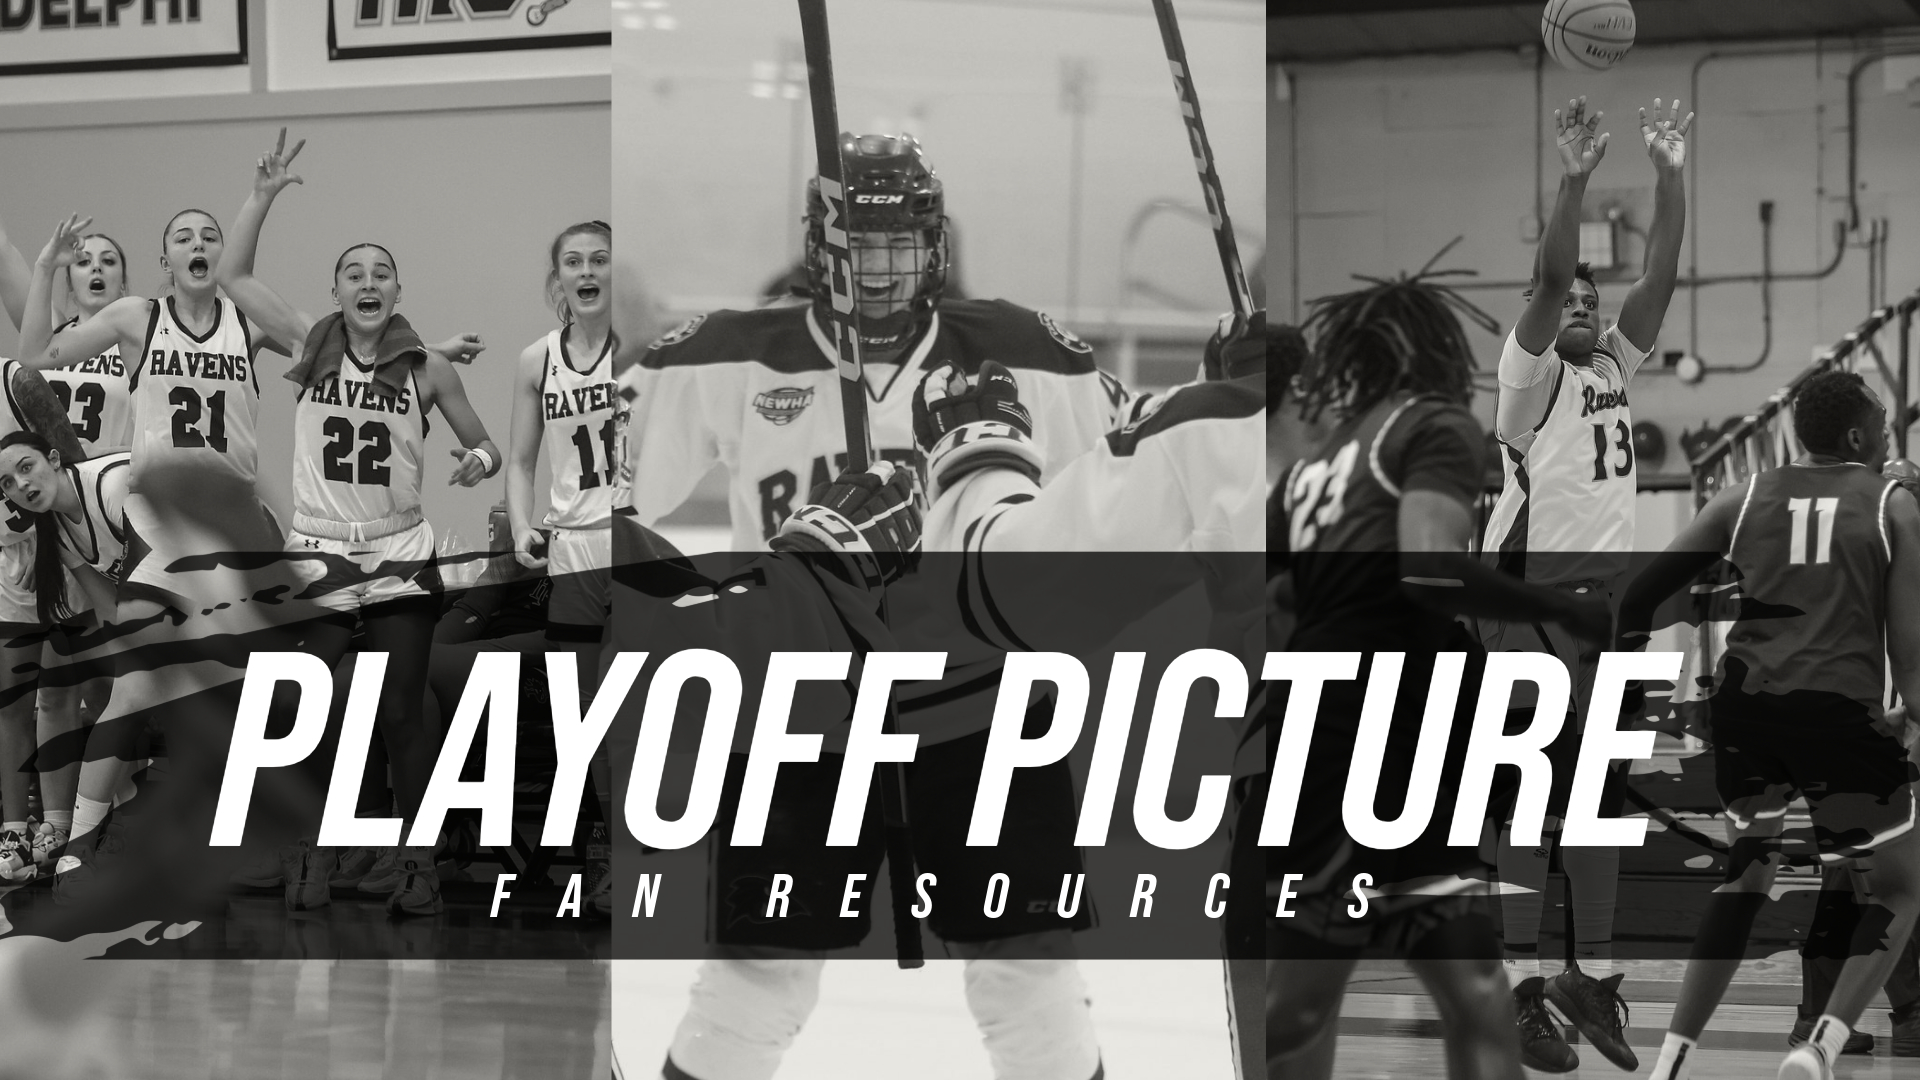 Playoff Picture: Resources for Raven Nation as Three Programs Head into the Postseason